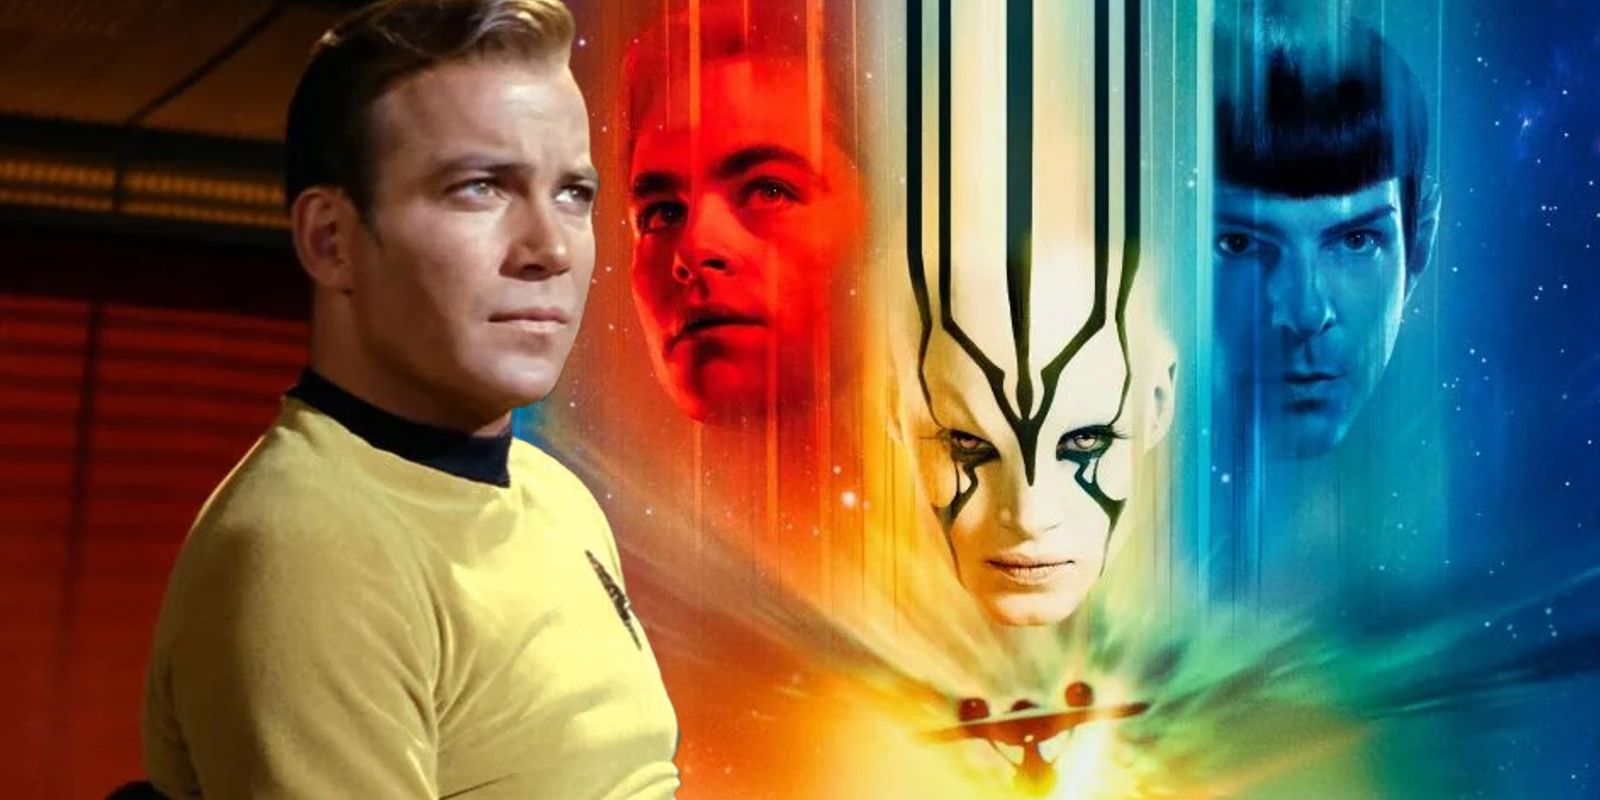 Why Star Trek 4 Must Avoid Recycling More TOS Stories